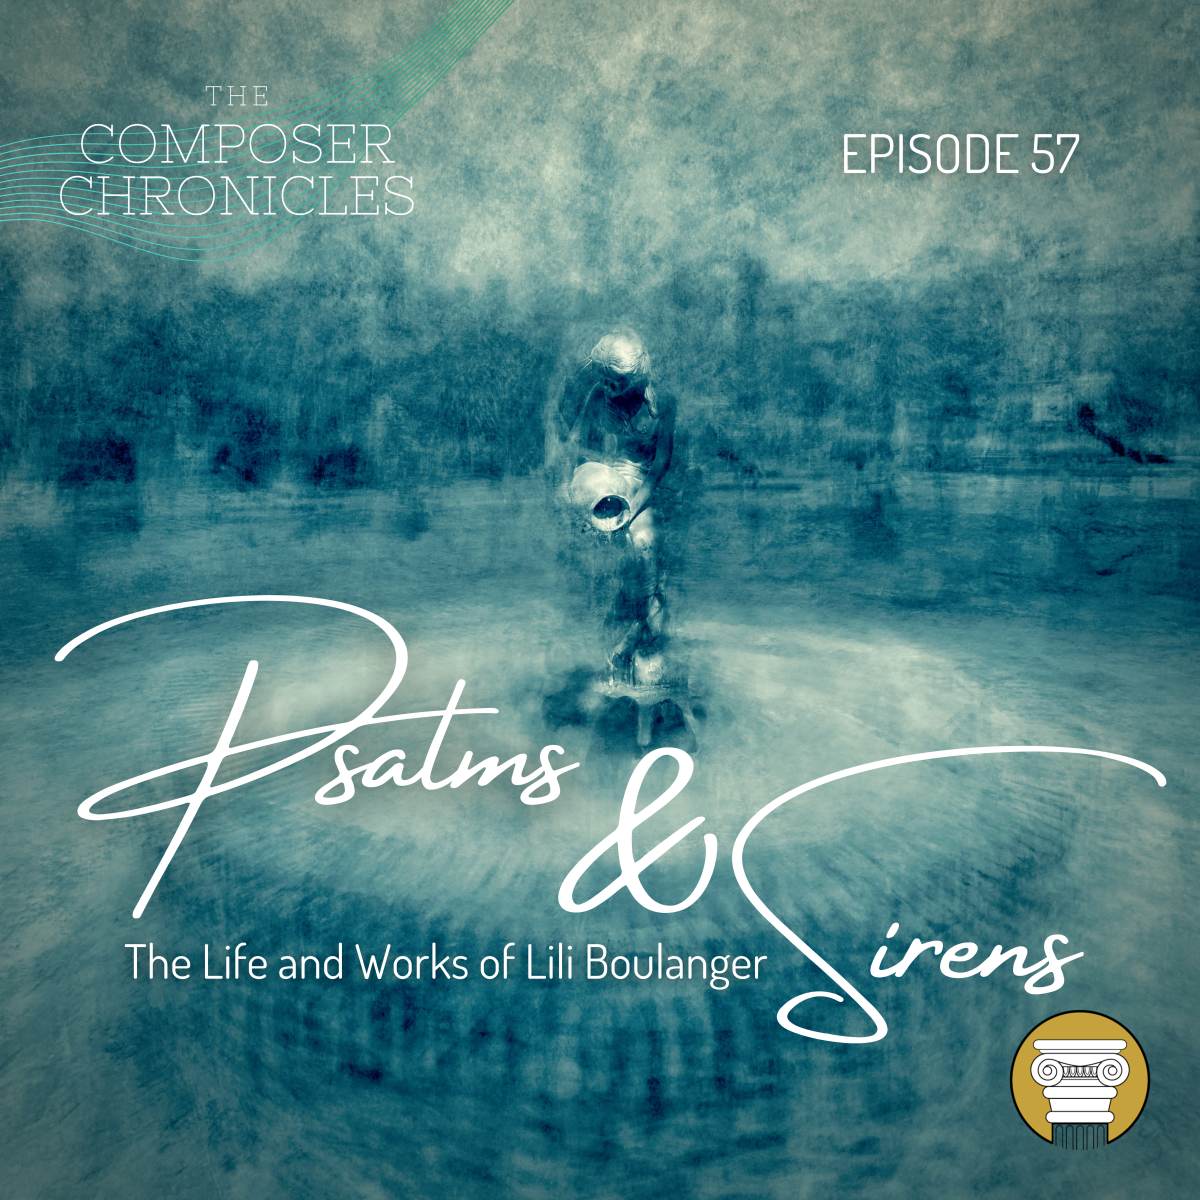 Ep. 57: Psalms and Sirens – The Life and Works of Lili Boulanger